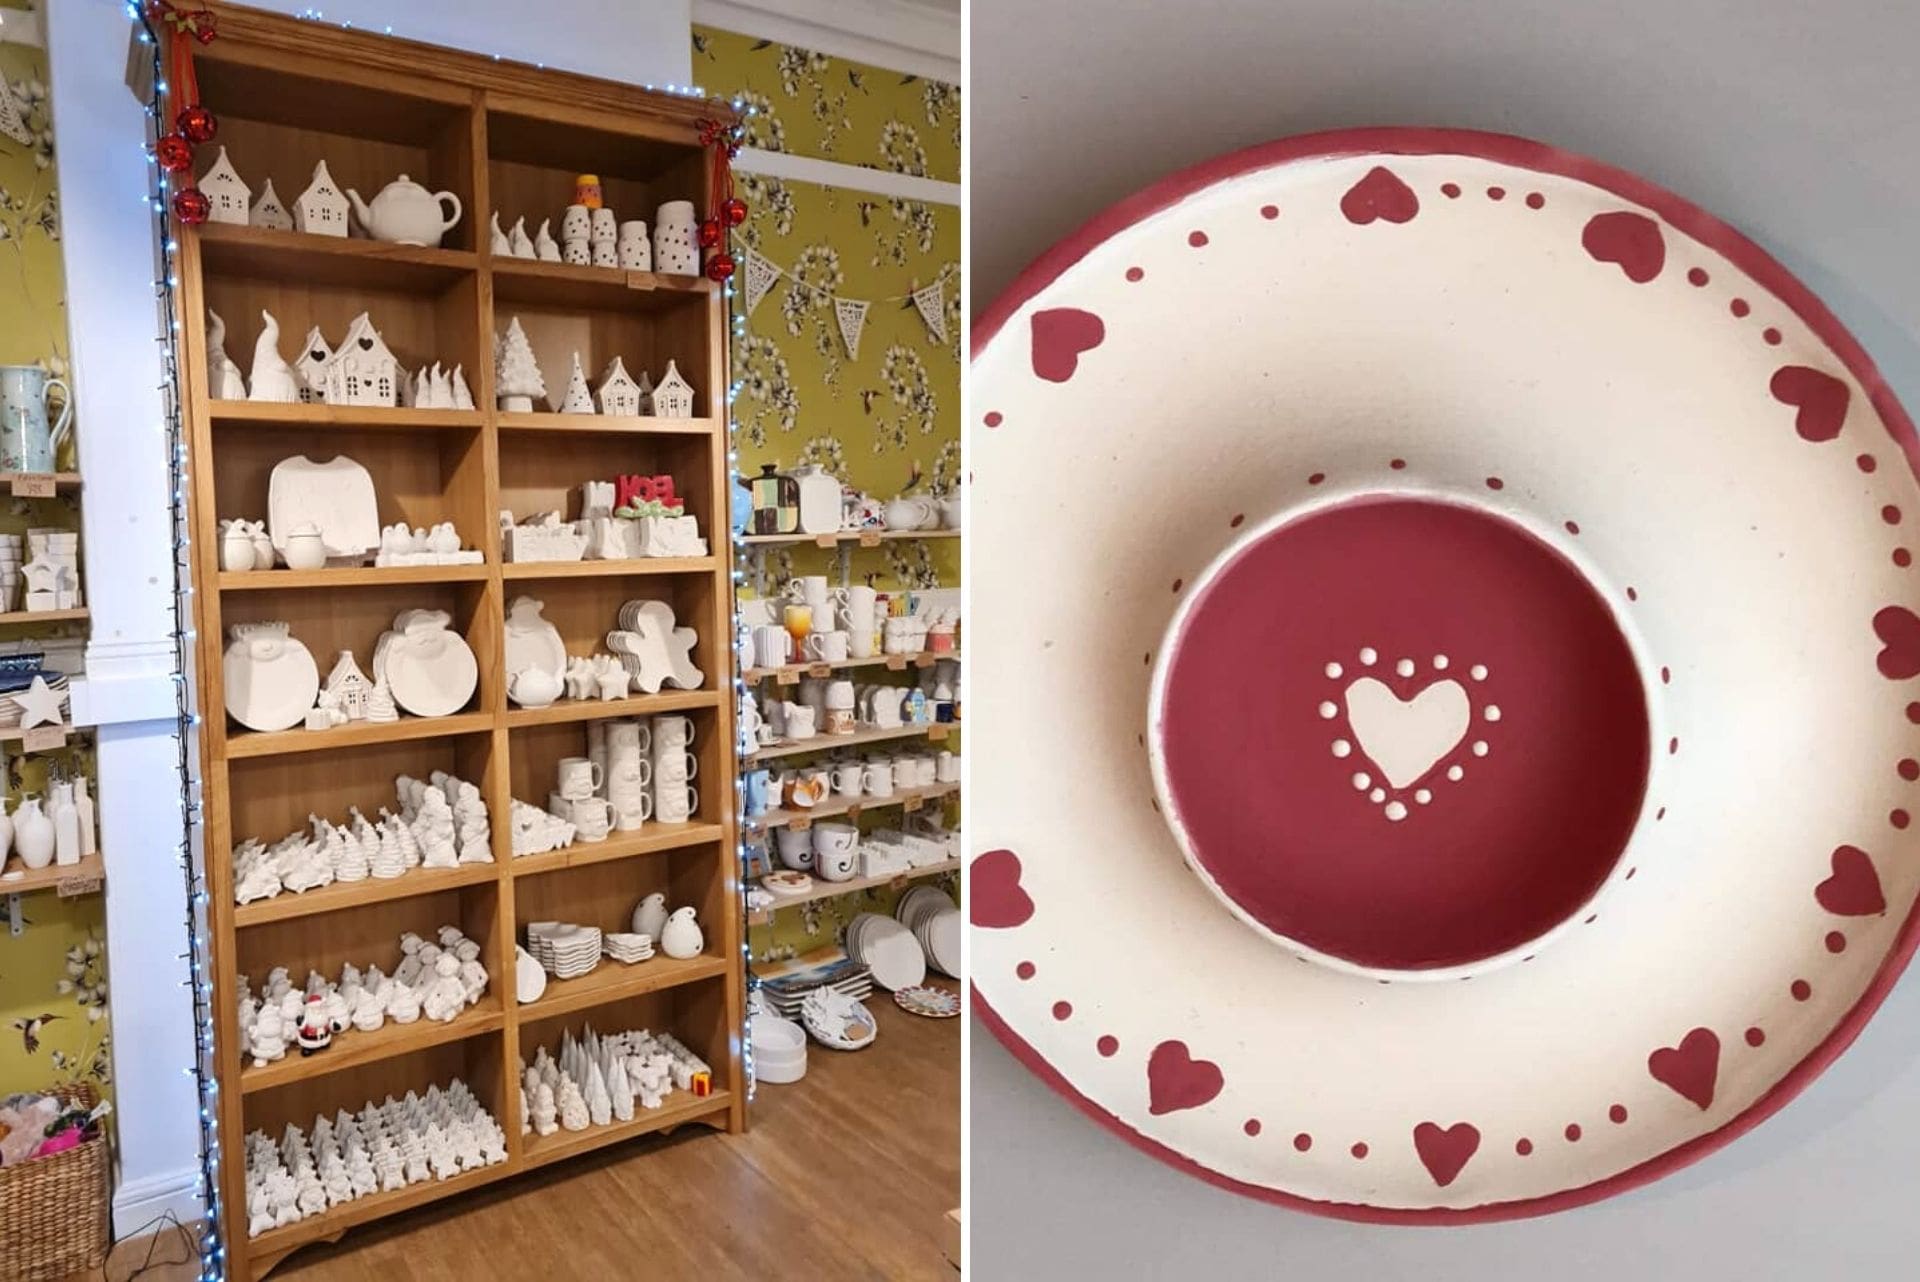 inside-of-bish-bash-pot-pottery-painting-white-plate-with-red-hearts-romantic-things-to-do-in-york-for-couples